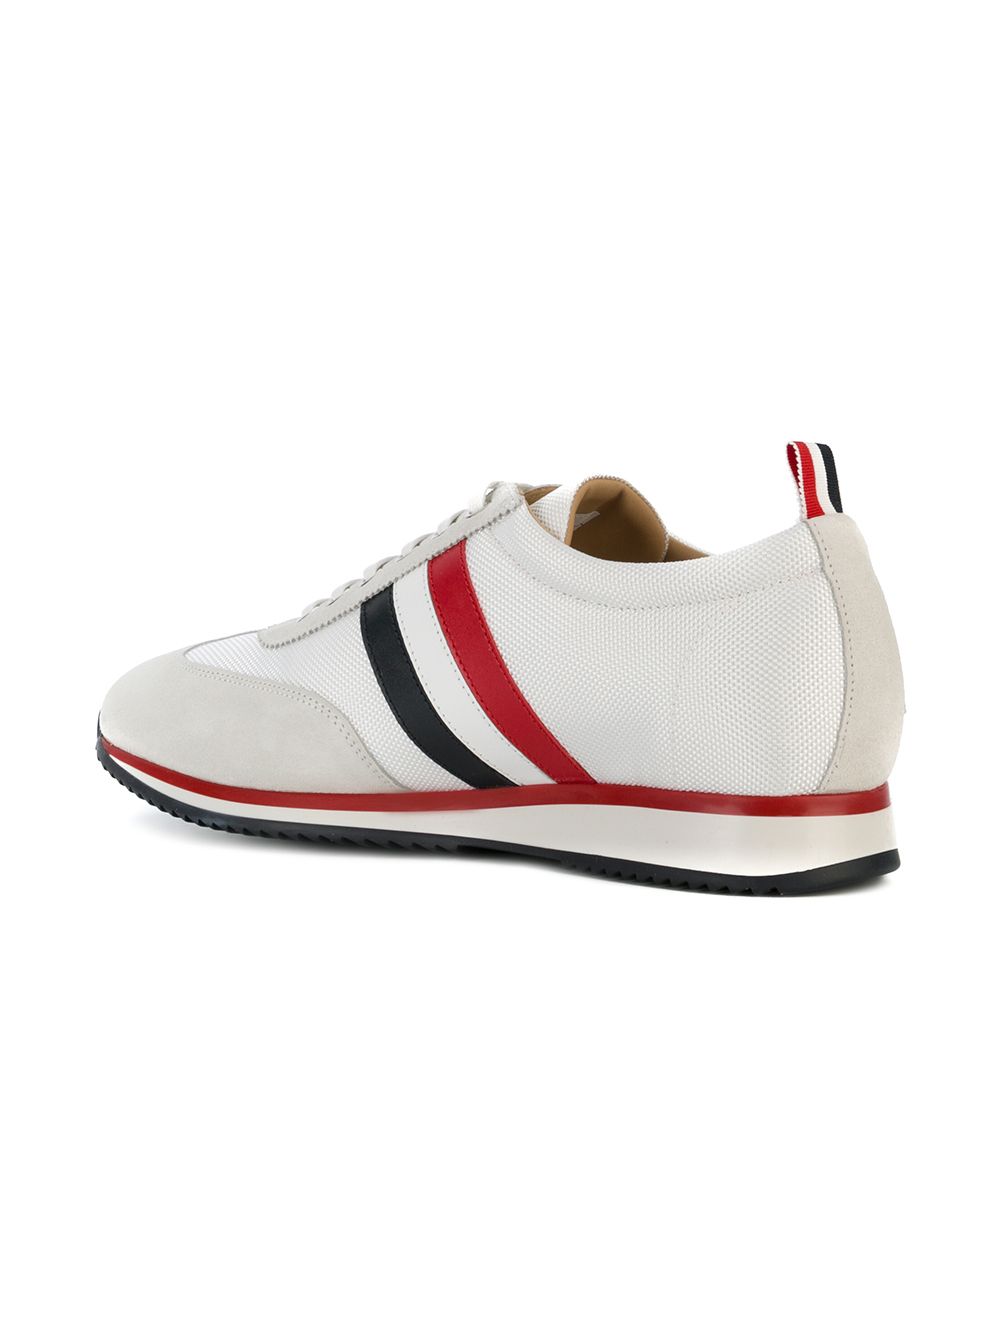 white shoes with blue stripes